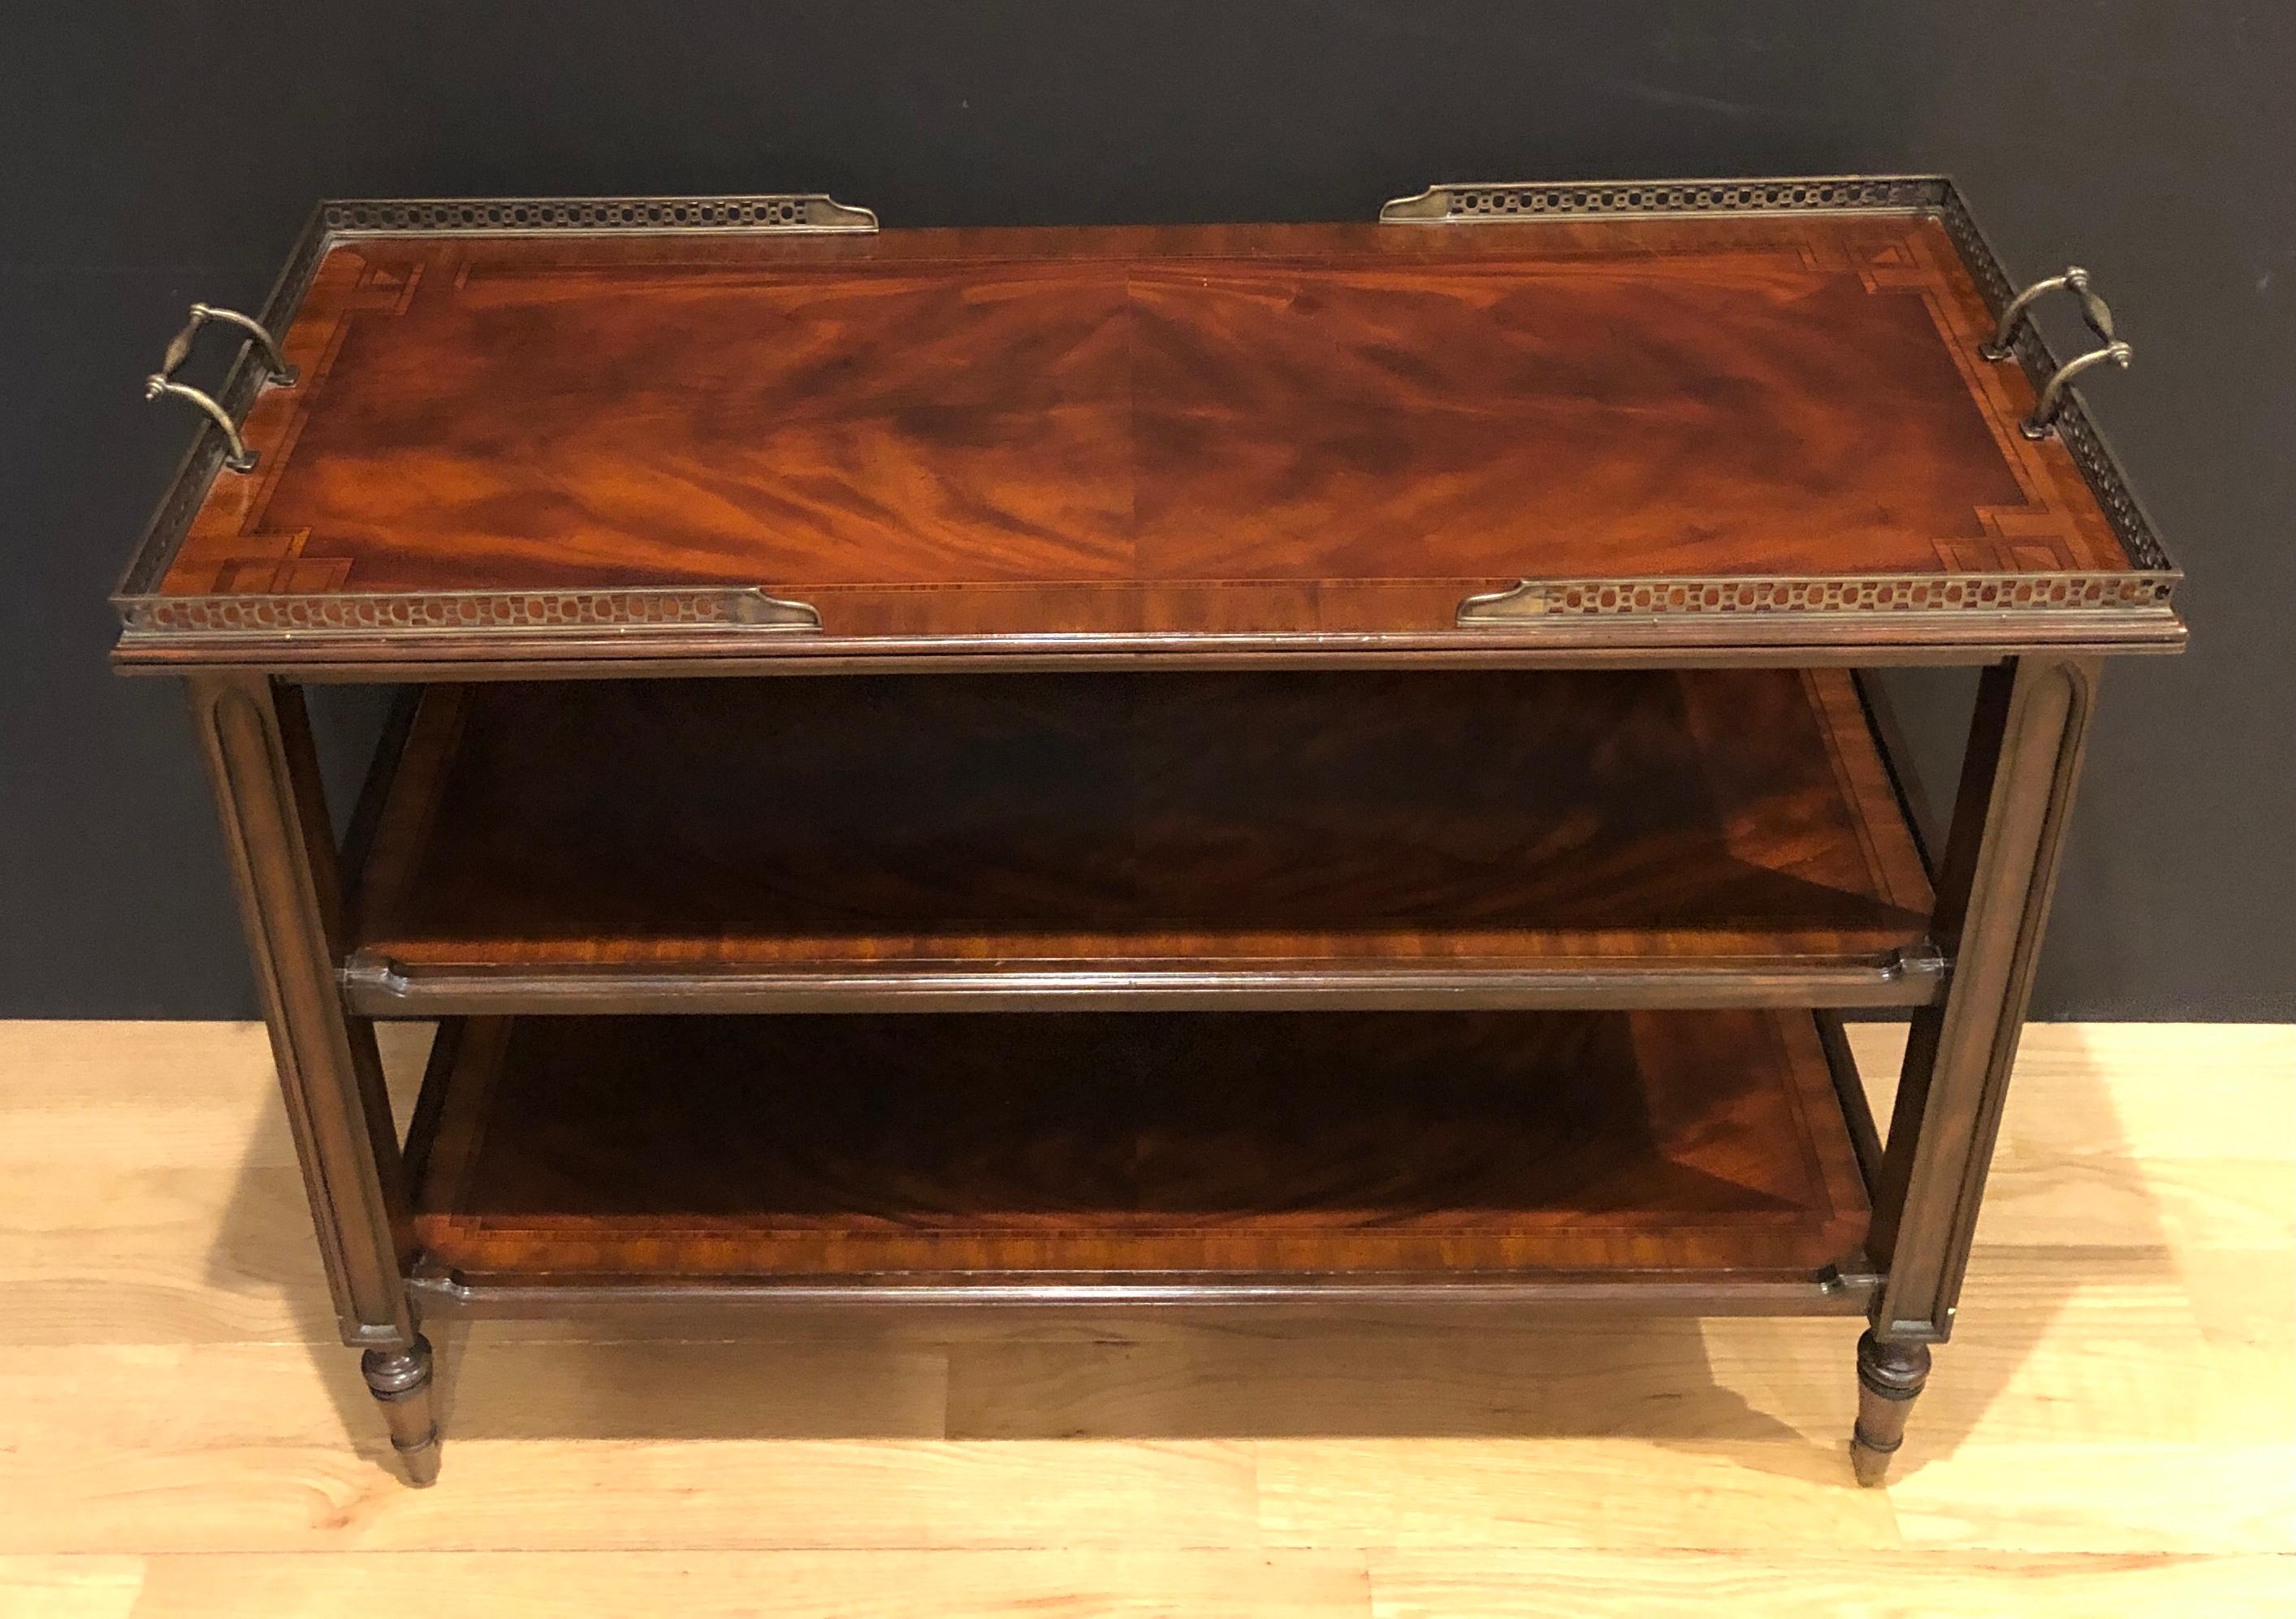 Three-tier brass gallery dessert cart. Beverage trolley or tea cart. Book matched crotch mahogany with boarder inlay and brass pierced gallery. Brass casters and handles on both left and right sides.
Measures: 30